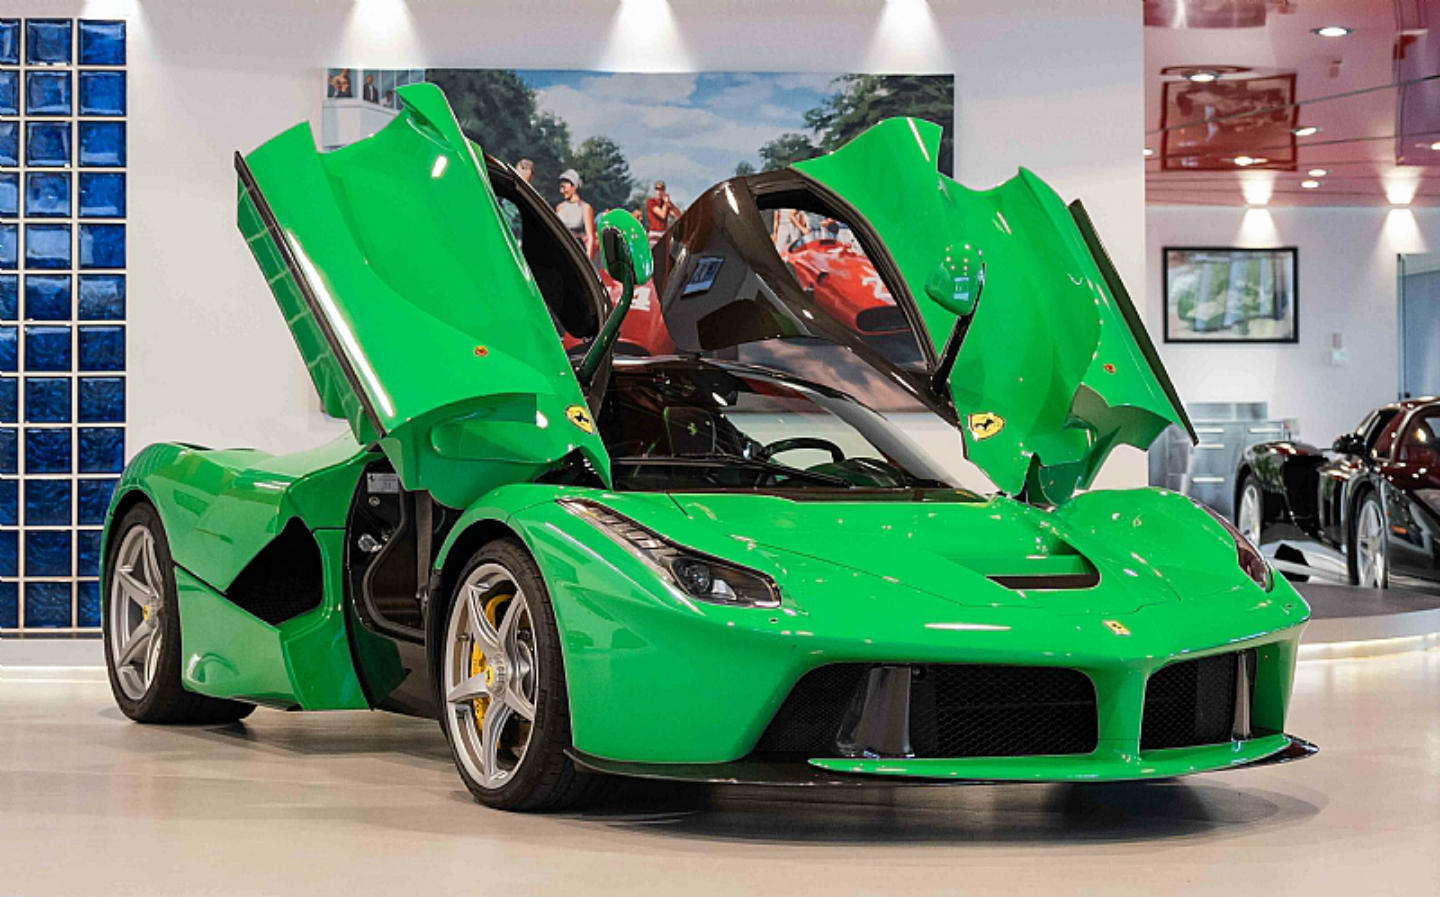 Jay Kay's lurid LaFerrari hypercar is up for sale